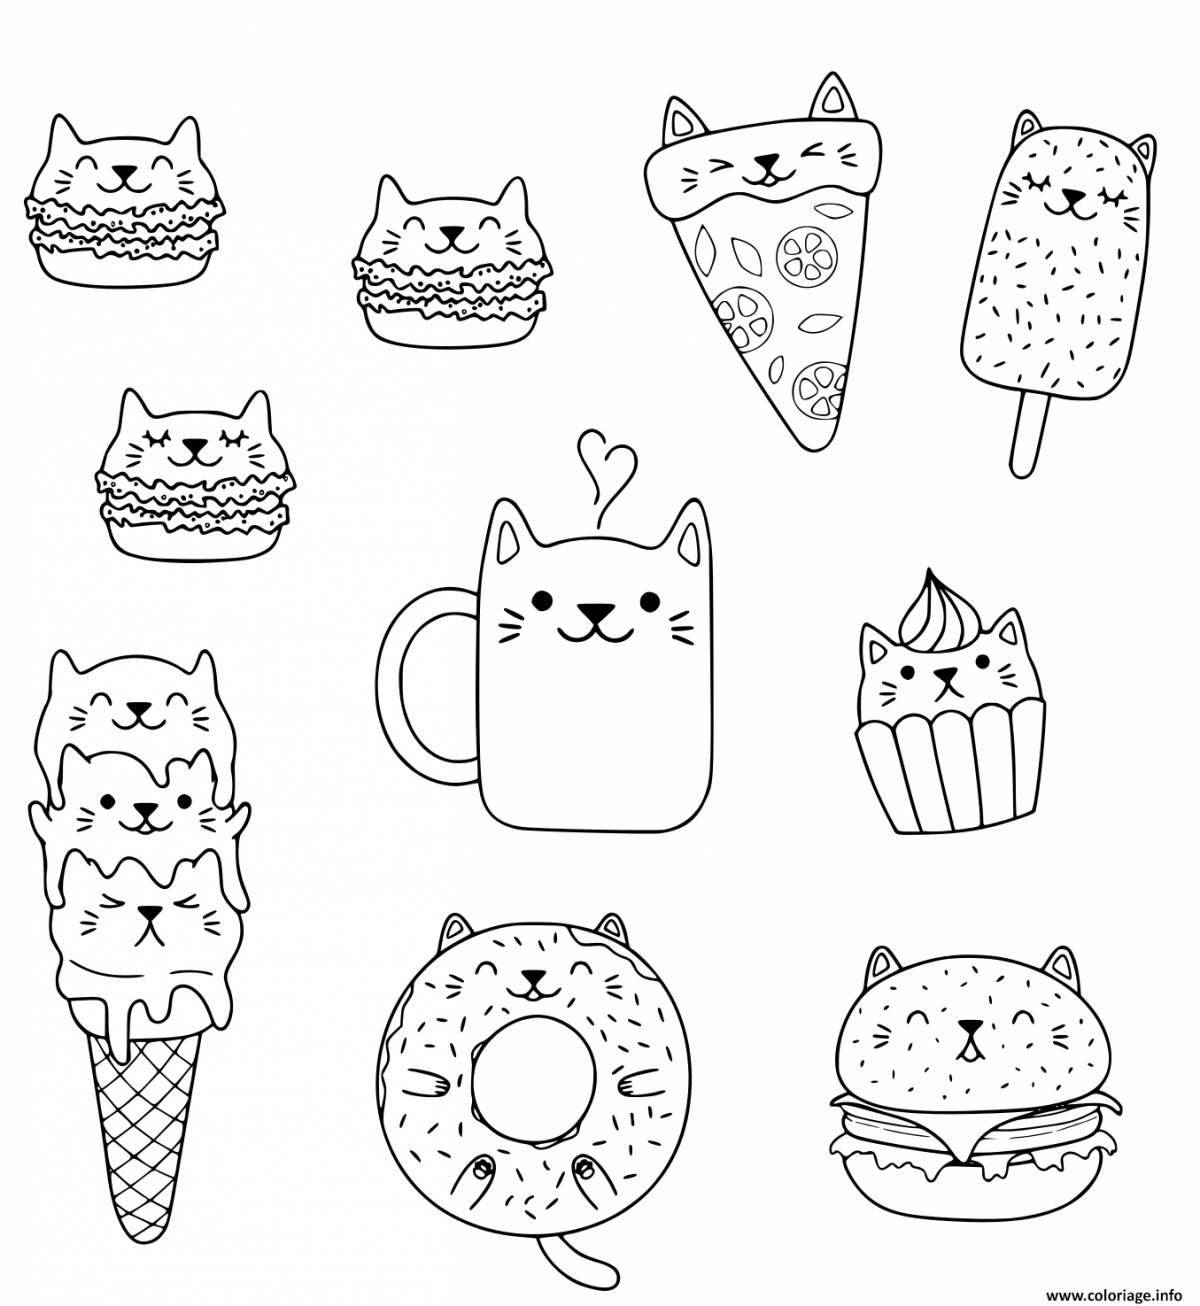 Coloring book witty sushi cat